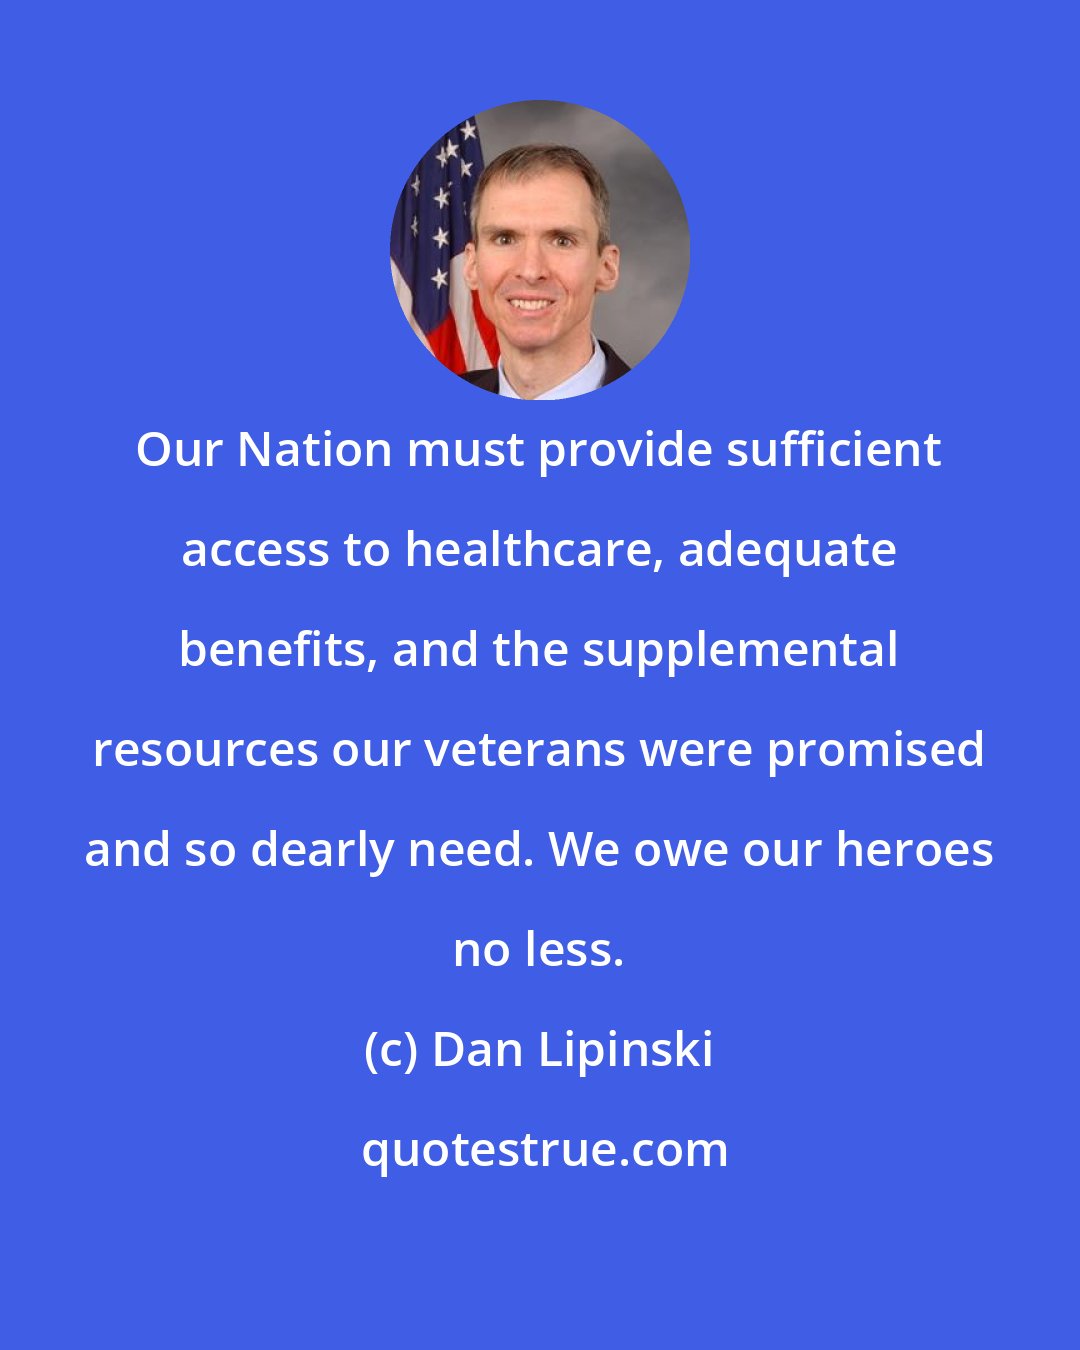 Dan Lipinski: Our Nation must provide sufficient access to healthcare, adequate benefits, and the supplemental resources our veterans were promised and so dearly need. We owe our heroes no less.